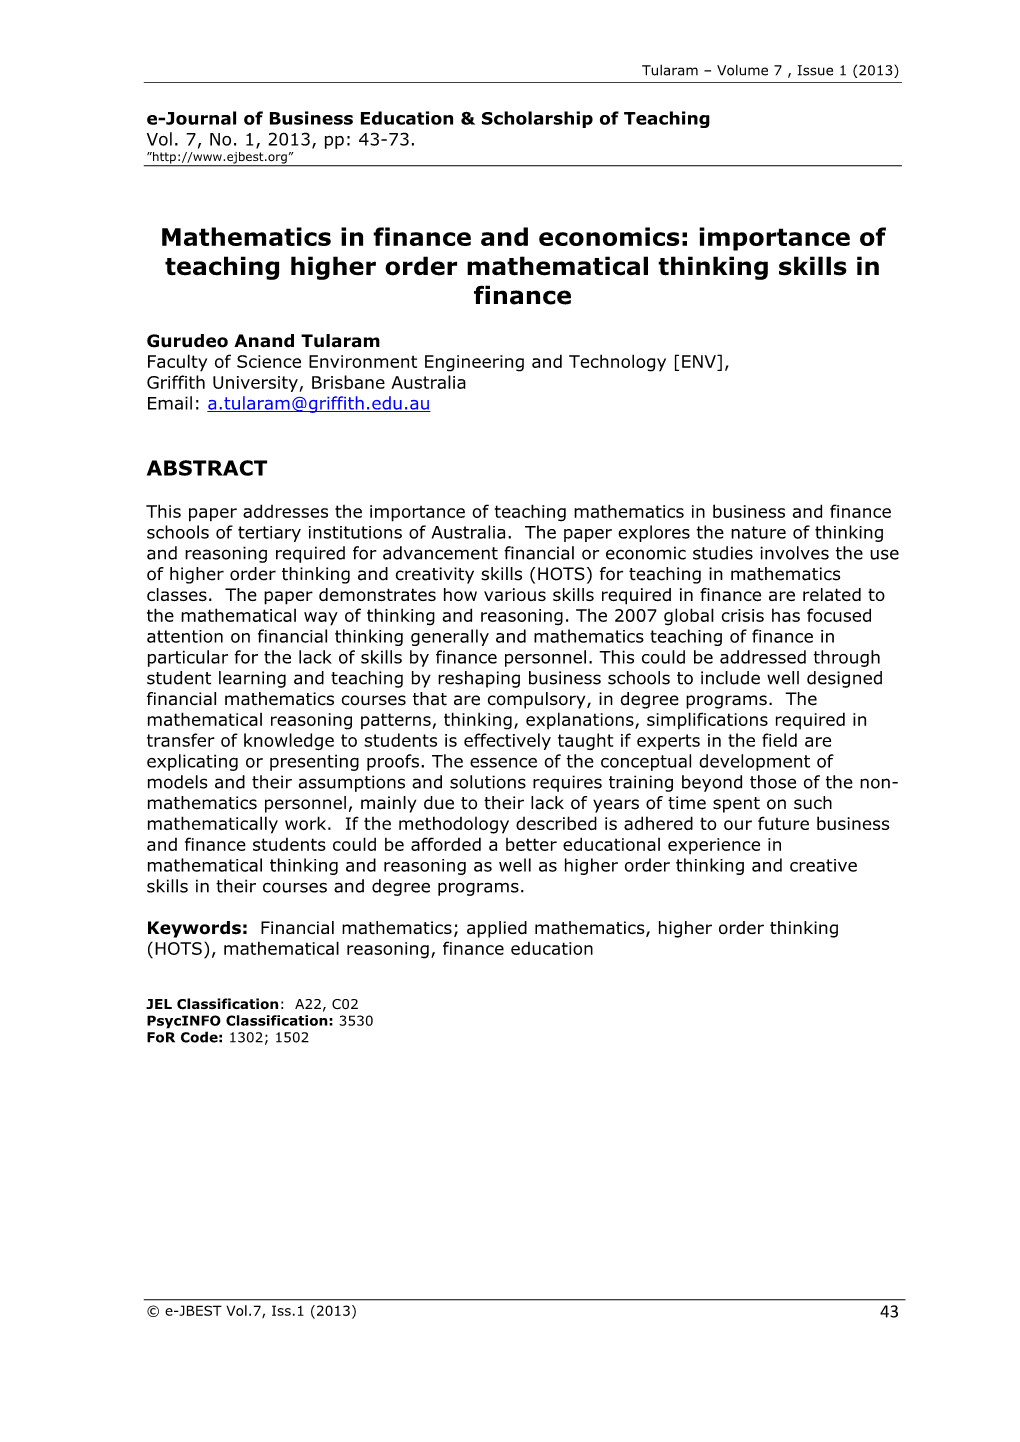 Importance of Teaching Higher Order Mathematical Thinking Skills in Finance